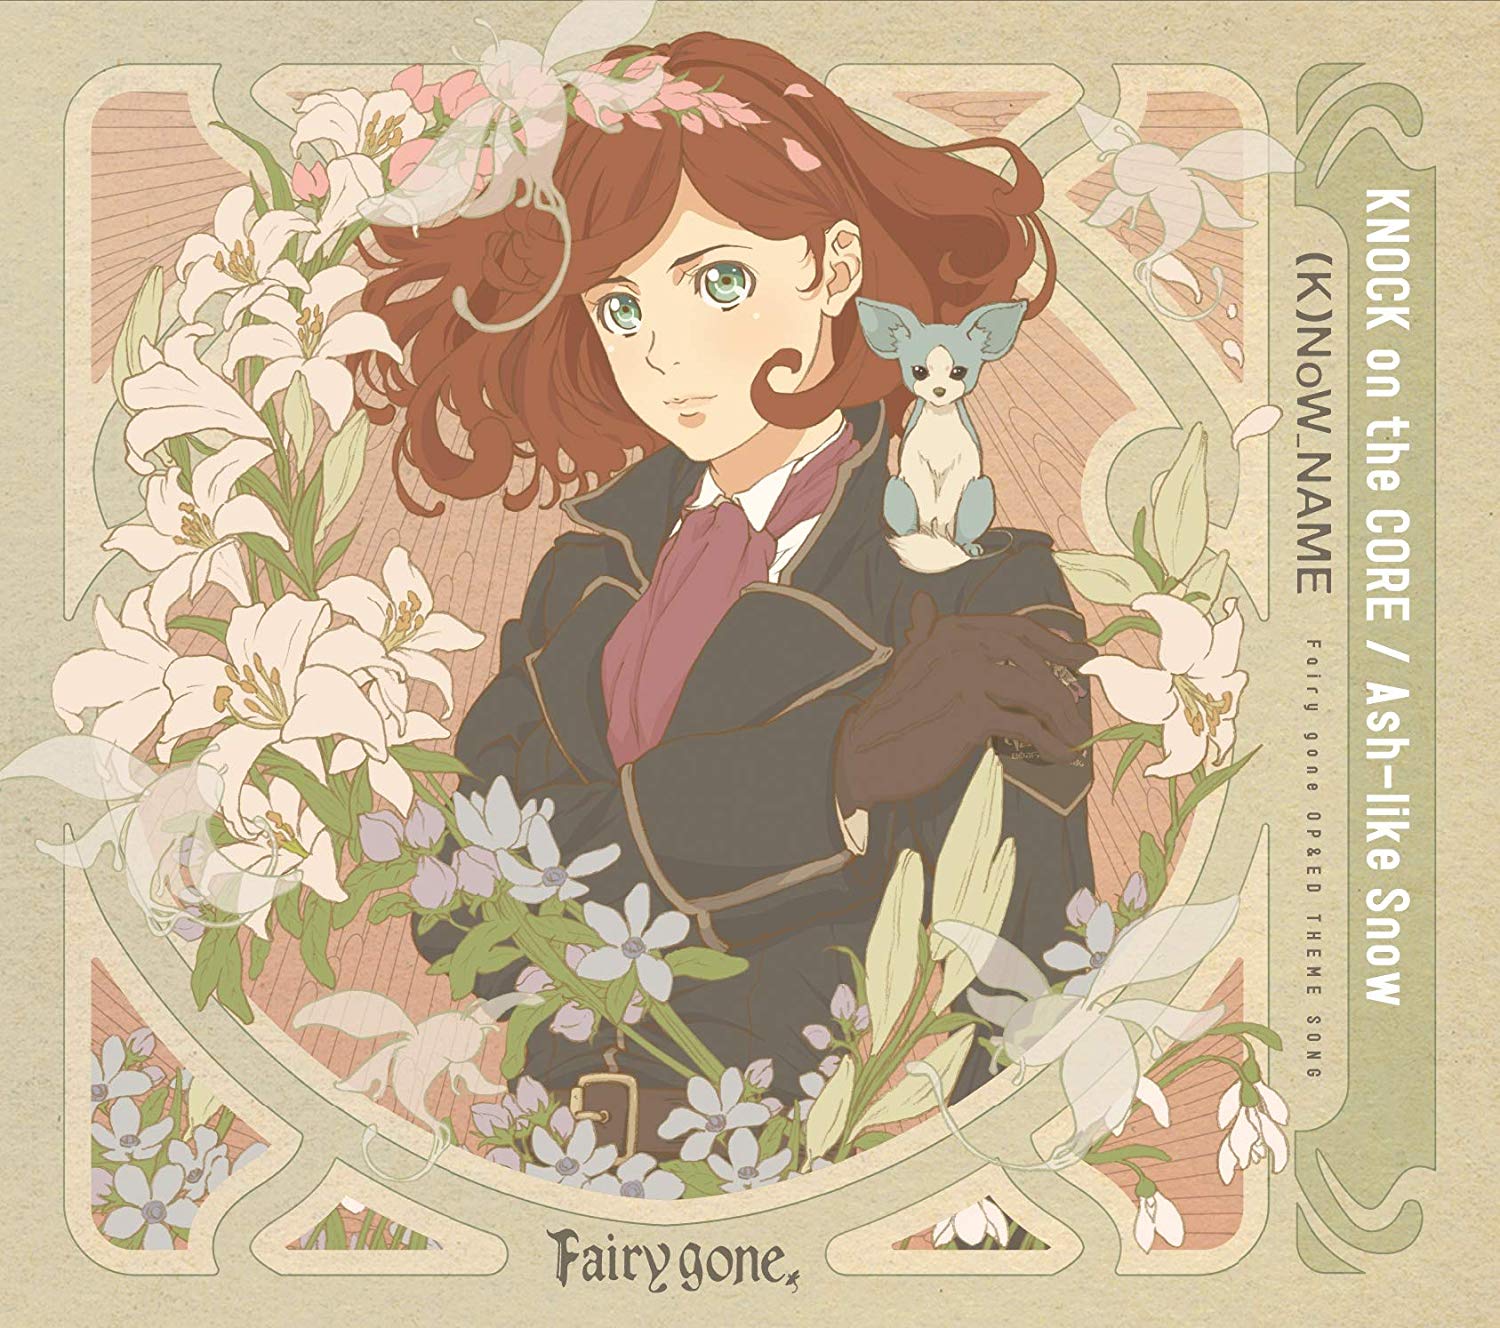 TVアニメ「Fairy gone フェアリ-ゴ-ン」OP&ED THEME SONG「KNOCK on the CORE/Ash-like Snow」 (CD)